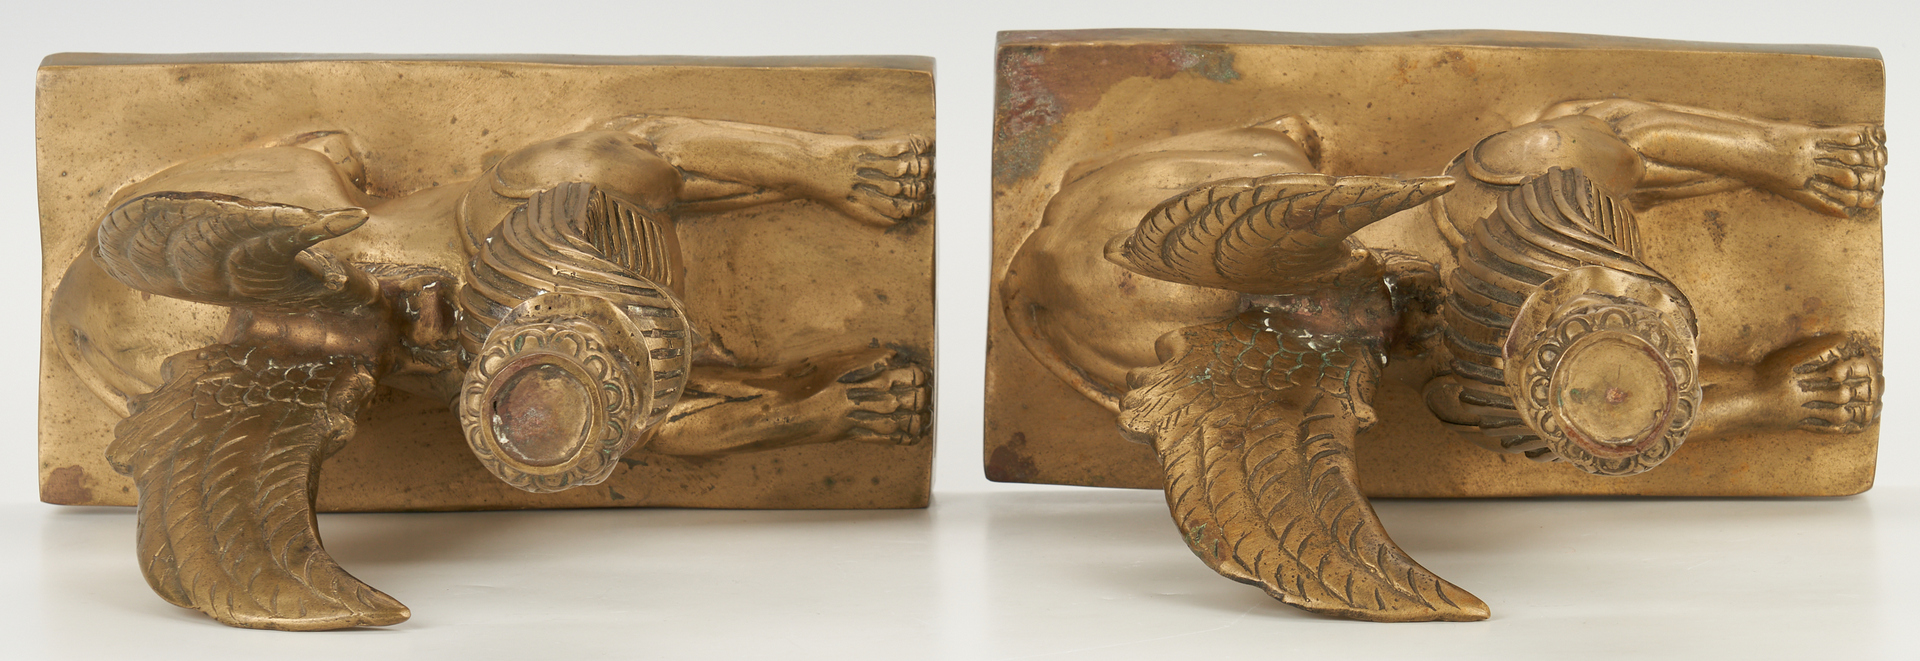 Lot 433: 5 Egyptian Revival Style Desk Accessories, incl. Sphinxes